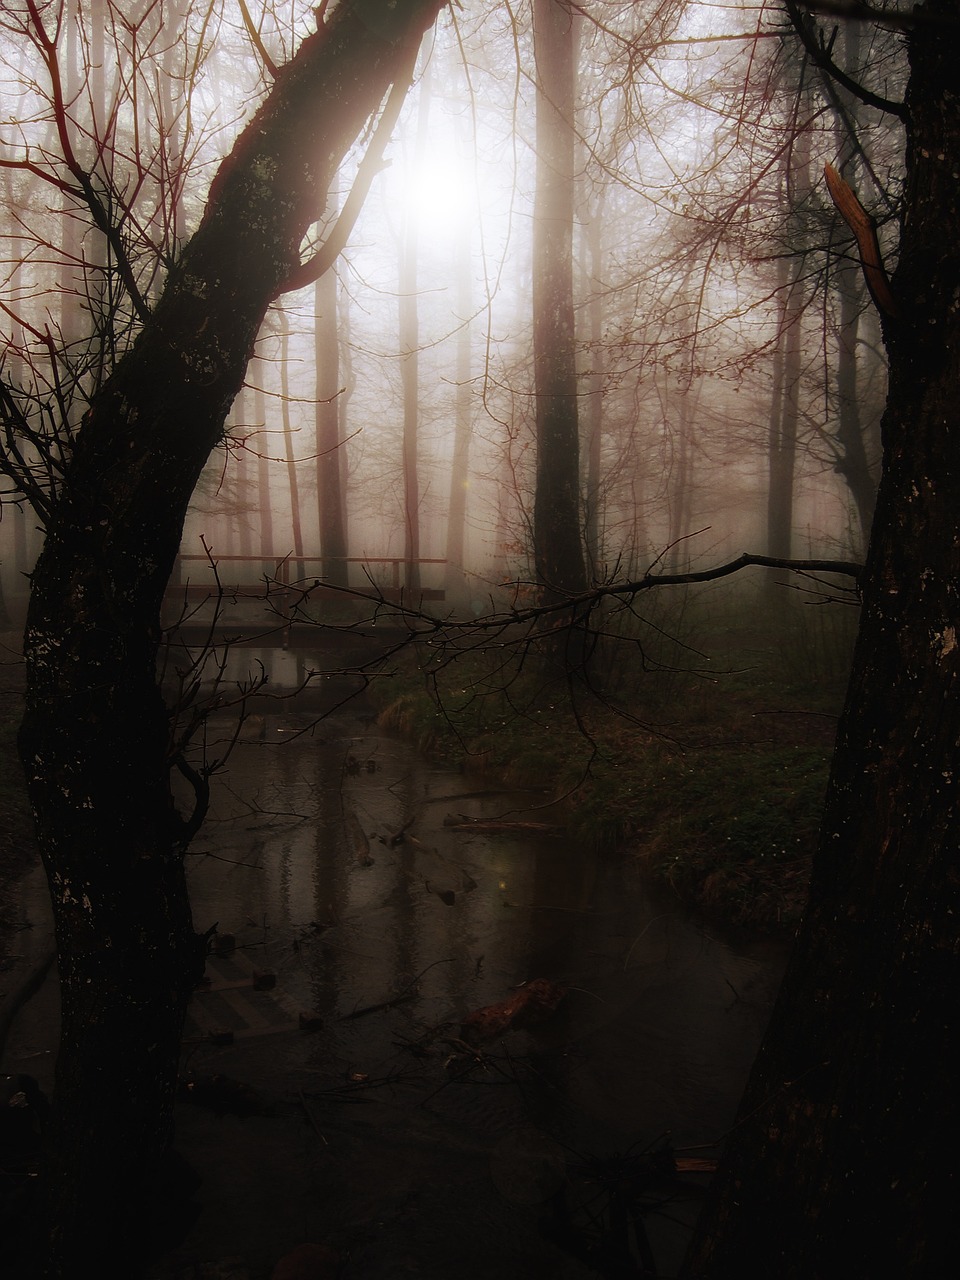 a foggy forest filled with lots of trees, a picture, inspired by Samuel Hieronymus Grimm, tumblr, tonalism, creek, bridge, dark fairytale, misty swamp